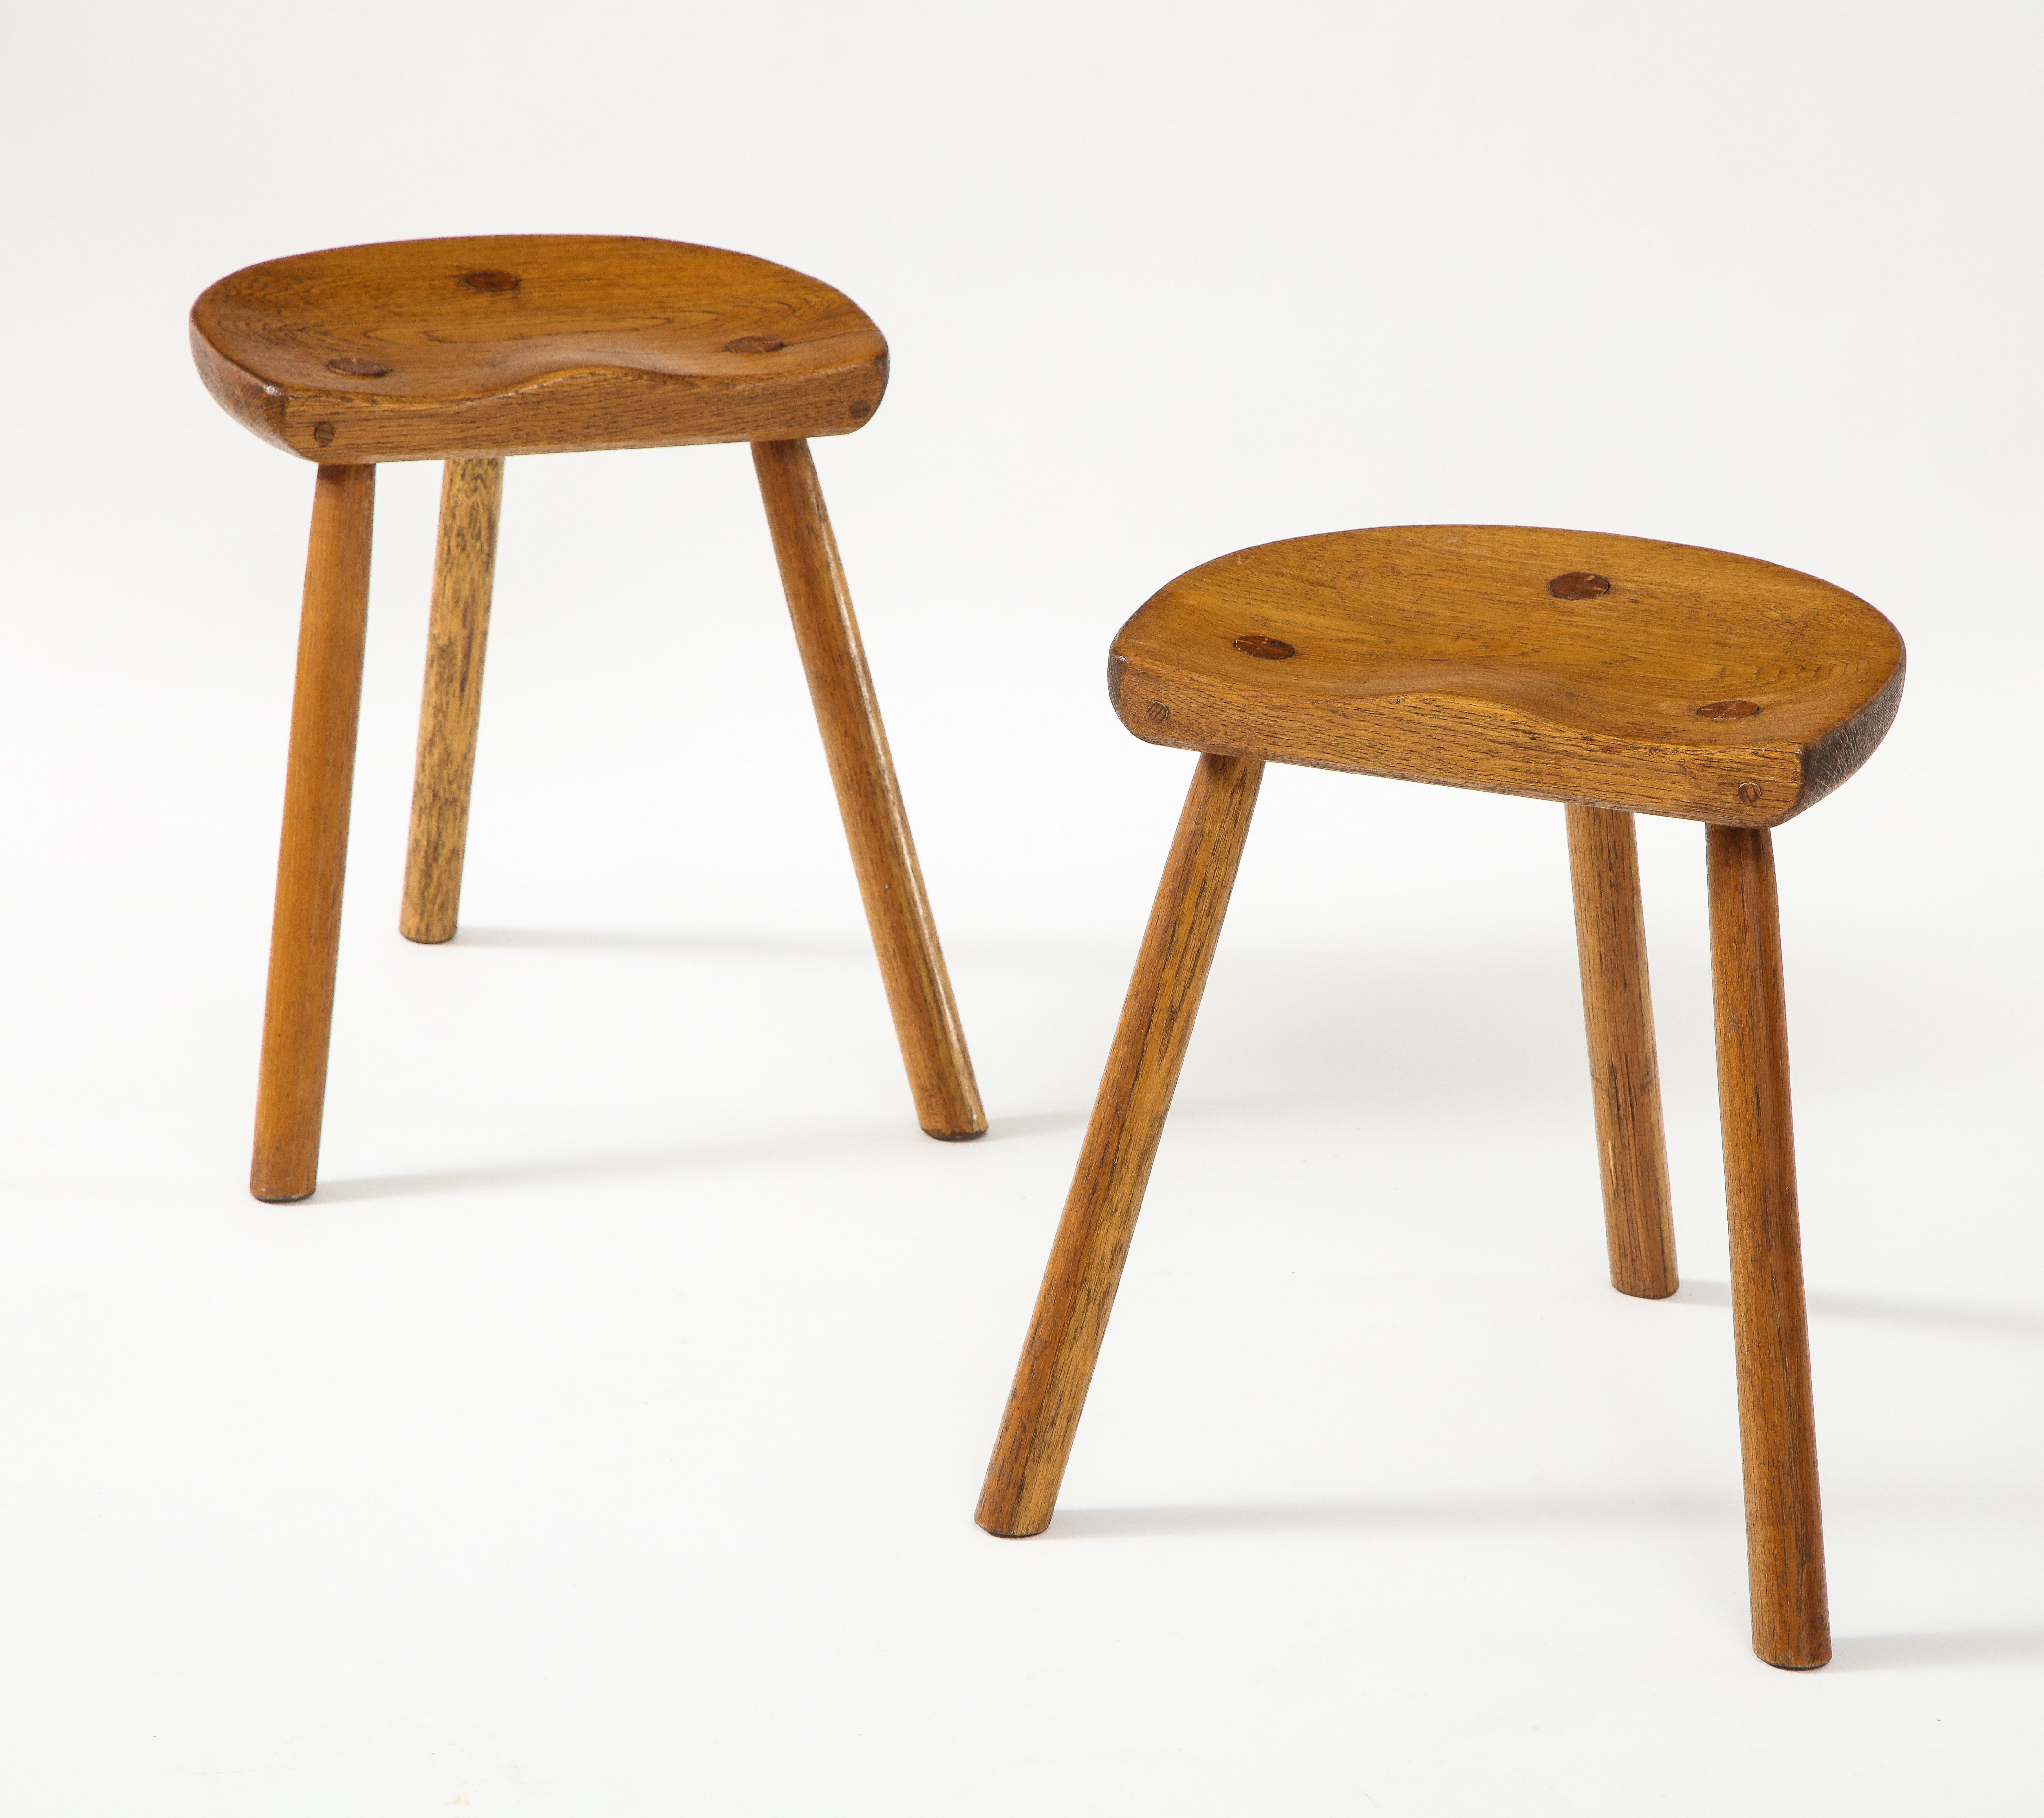 Pair of Scandinavian (possibly French) 'Seat' tripod stools, 1950's
Oak, fine construction details
Measures: H: 16 D seat: 10 W seat: 13, legs at base are apart 15.5-18 in.